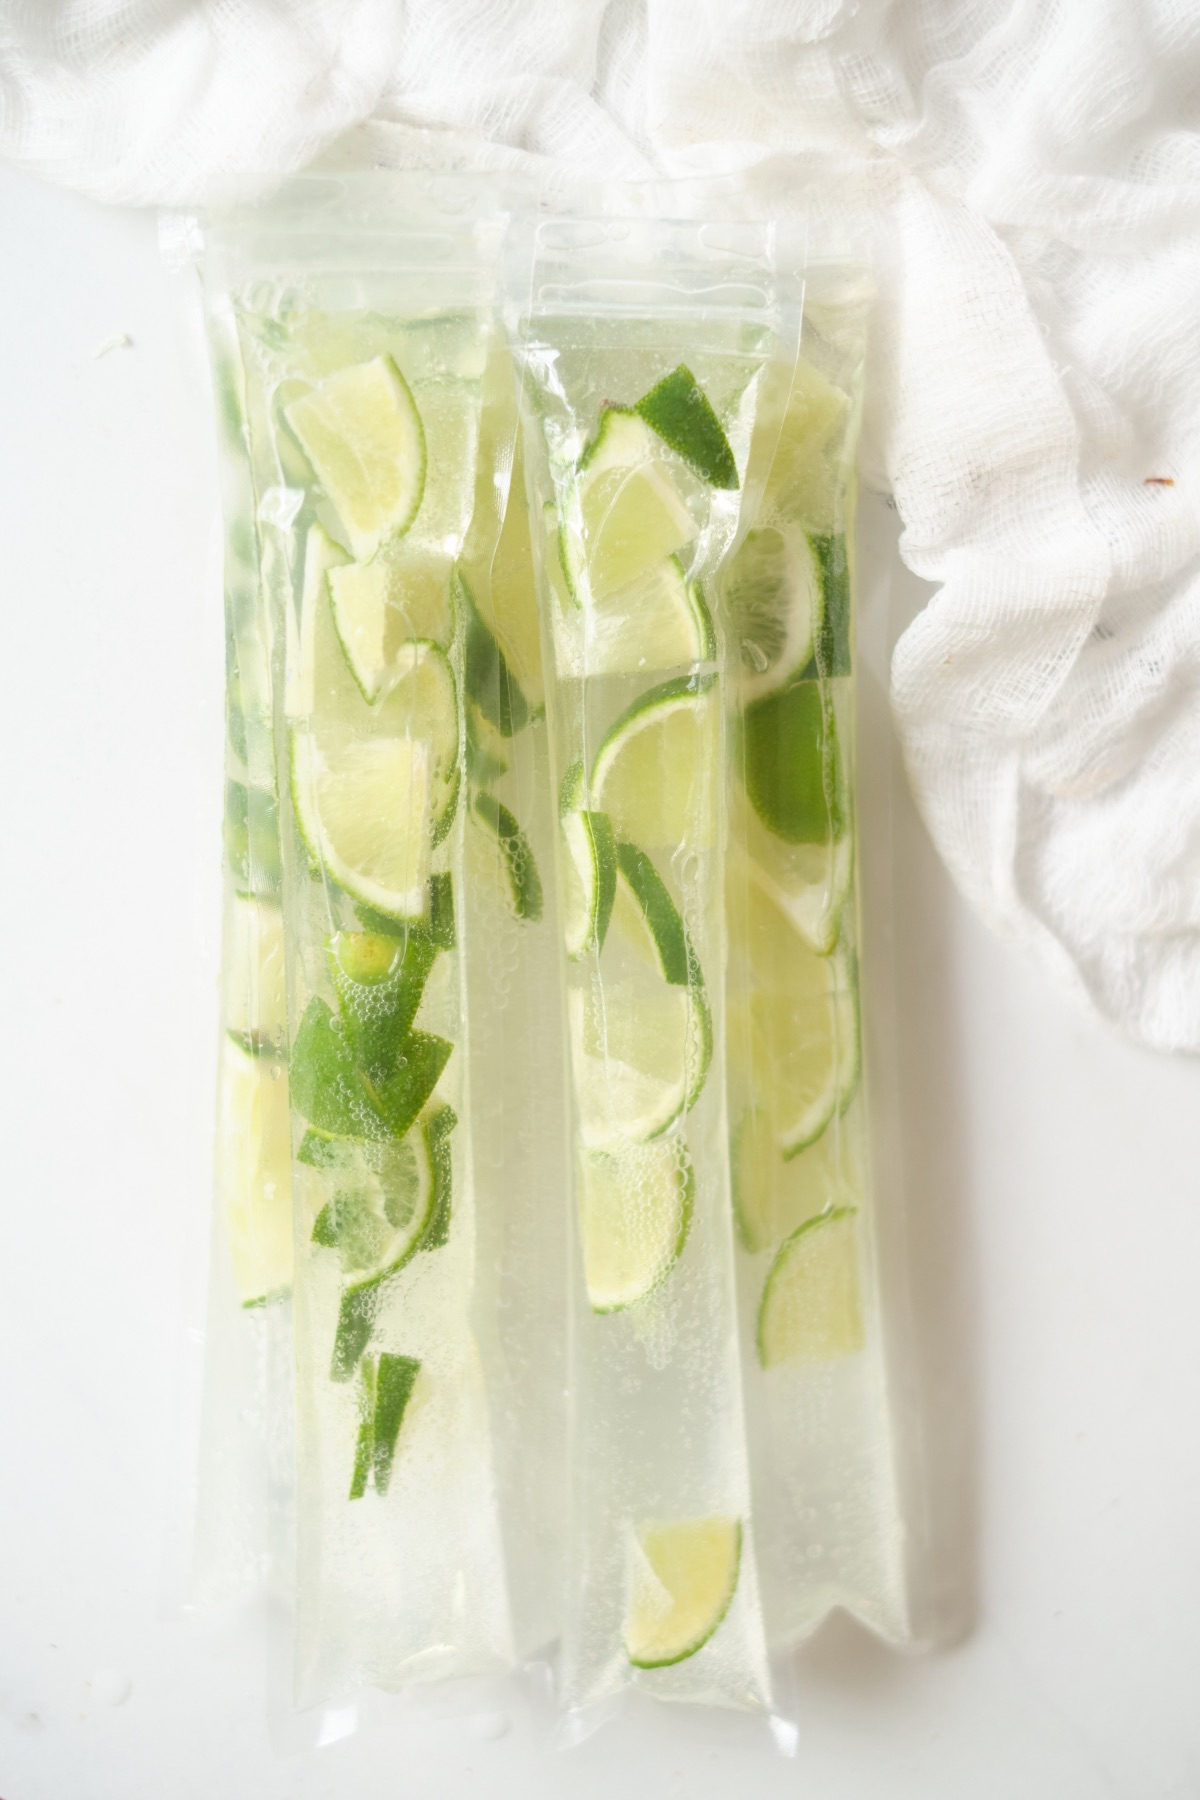 gin and tonic popsicle recipe ready to freeze